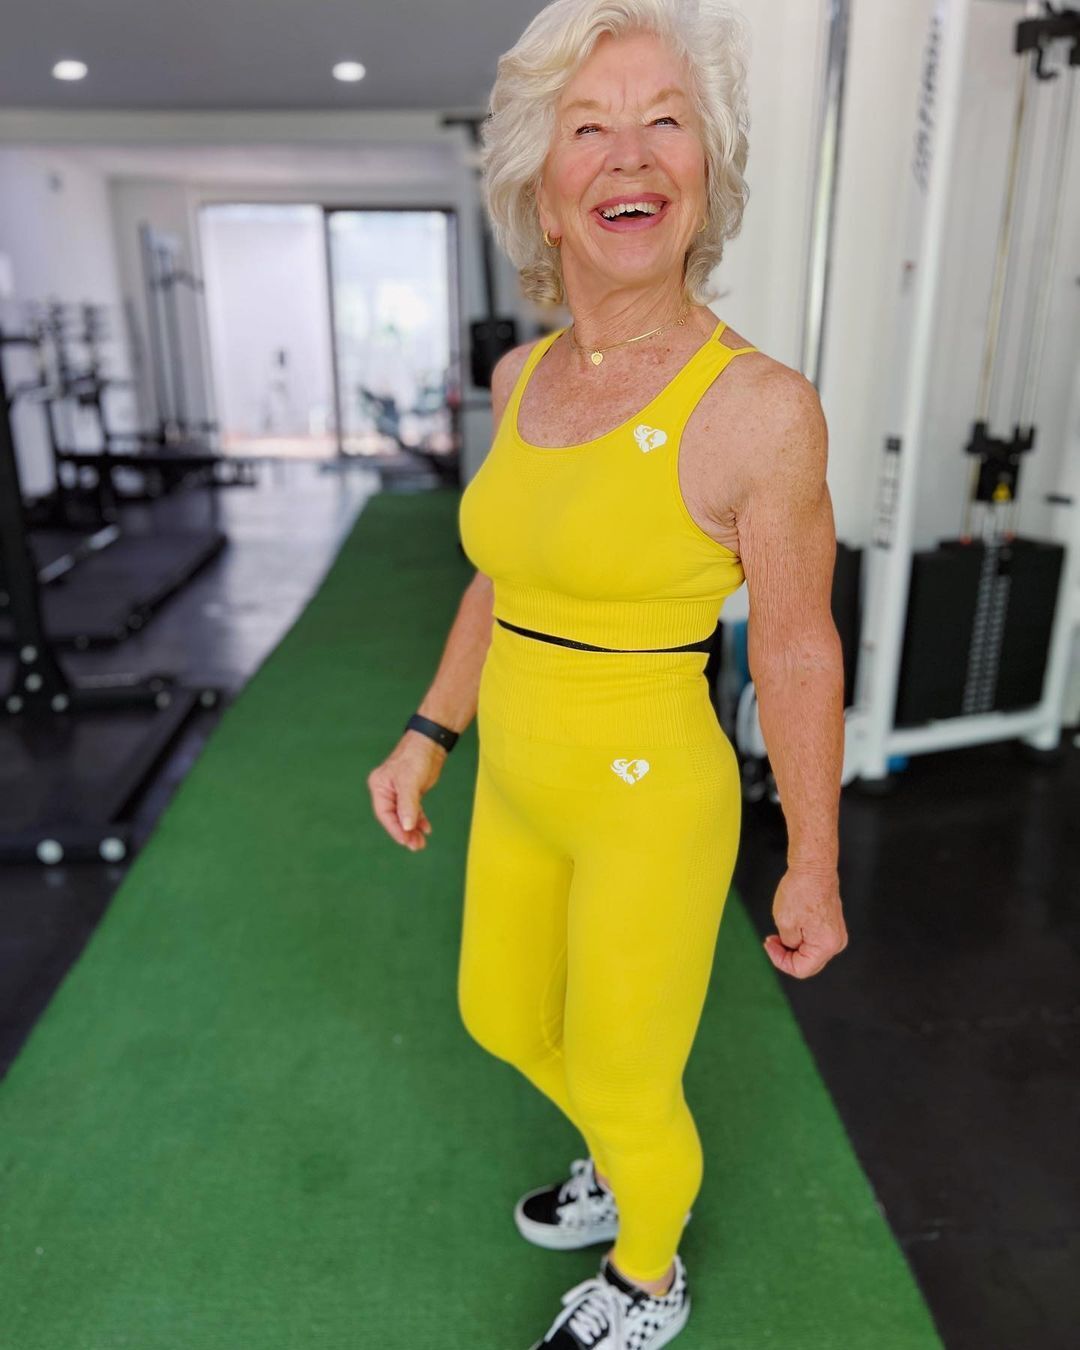 Outperforming the young: fitness grandmothers who have a great figure at 50+. Photo